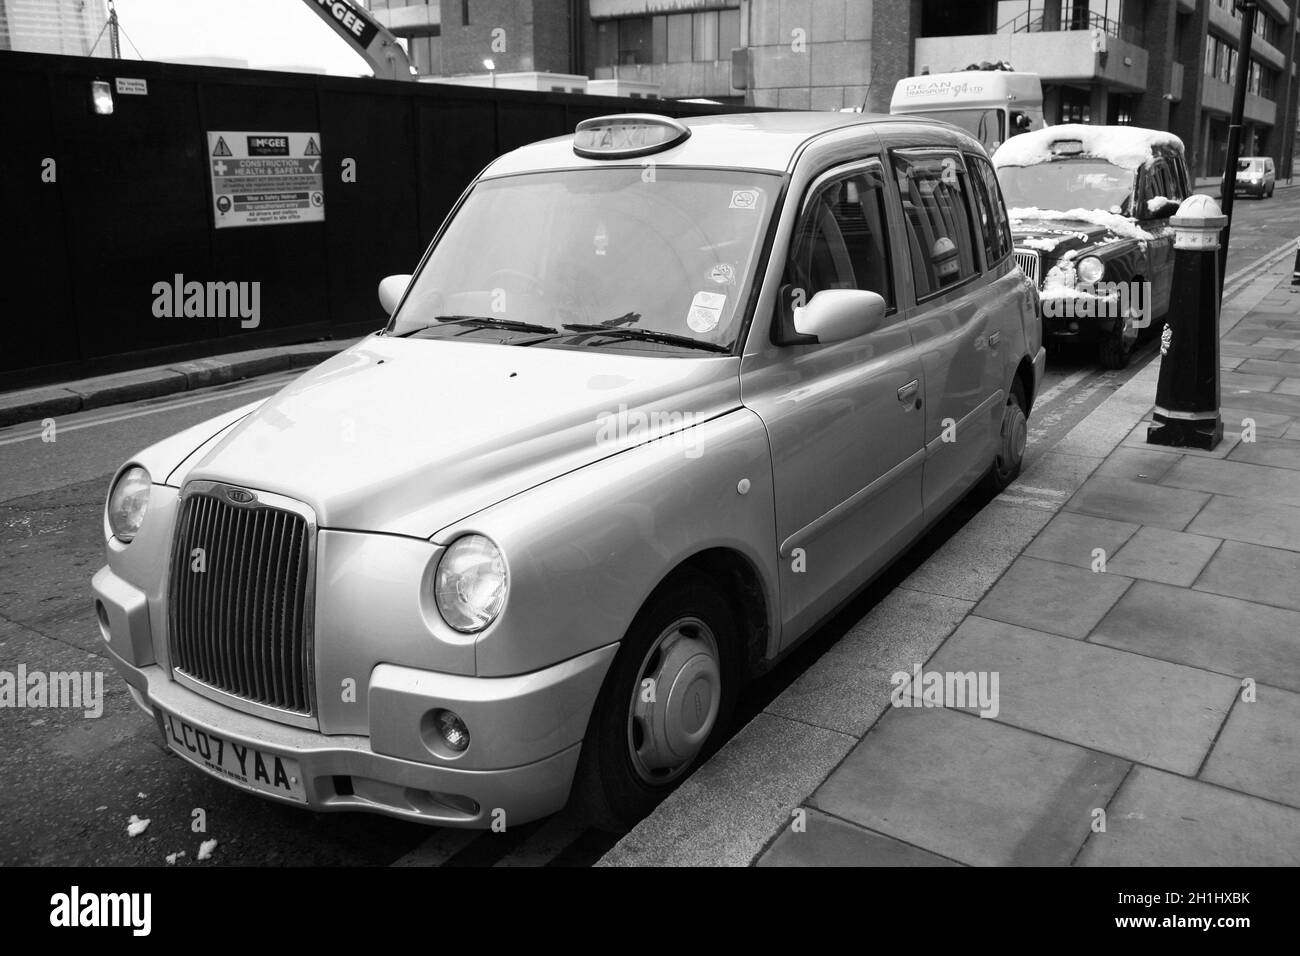 Lonodn, UK - December 1, 2010 : Taxi in the street of London on May 8, 2010 in London, UK. Cabs, Taxis, are the most iconic symbol of London as well a Stock Photo